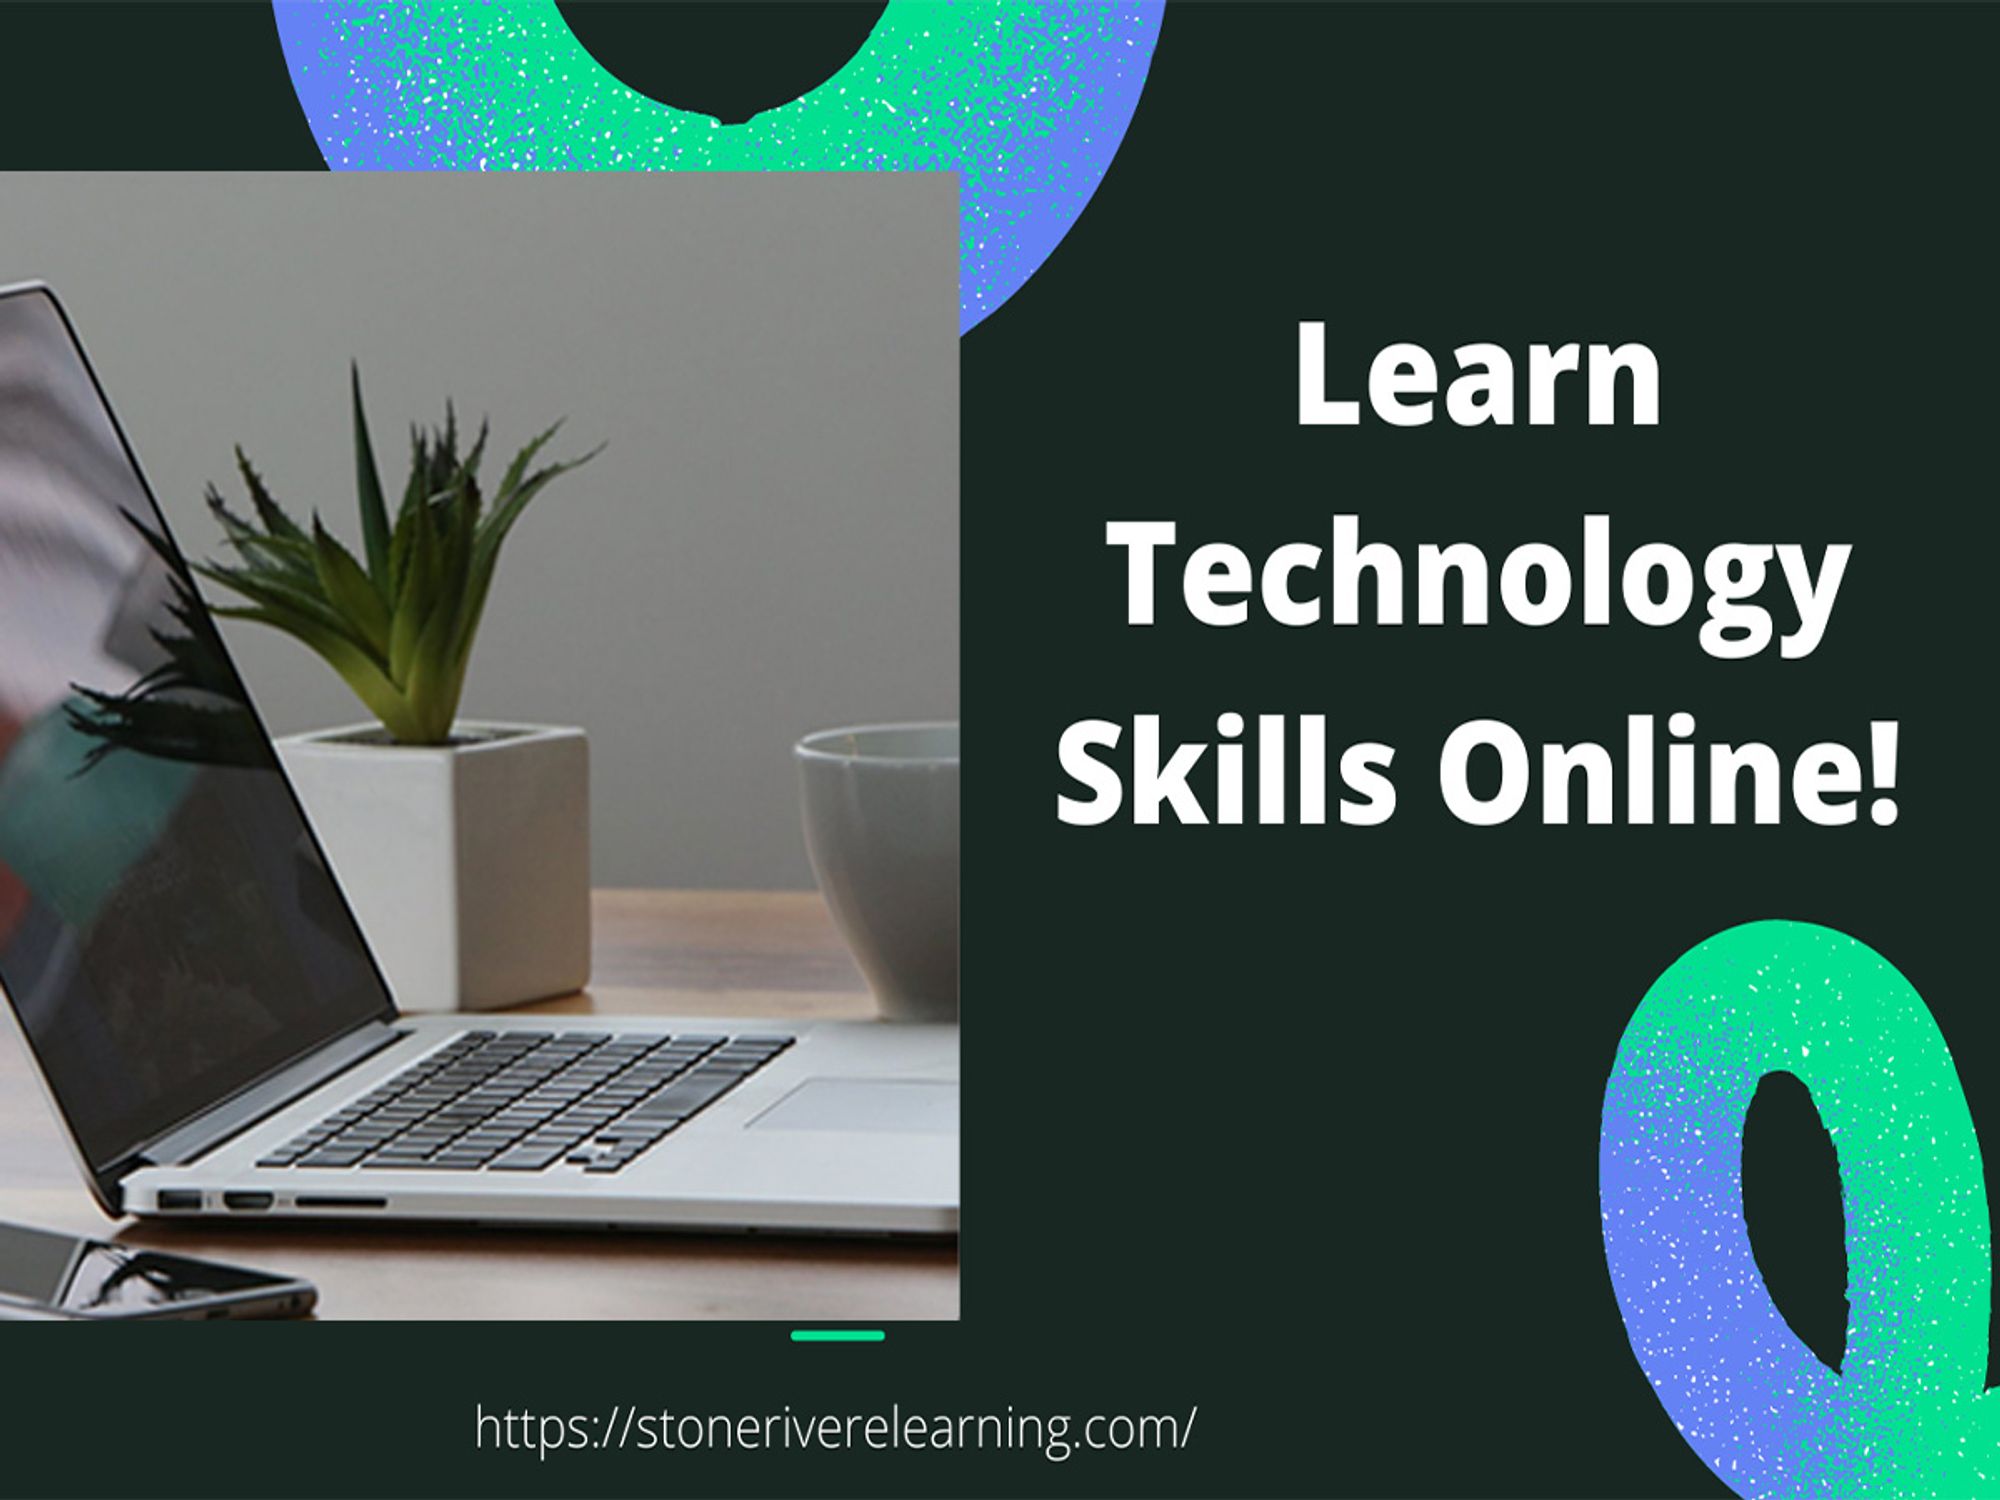 Enjoy lifelong learning with a subscription to these premier e-learning platforms